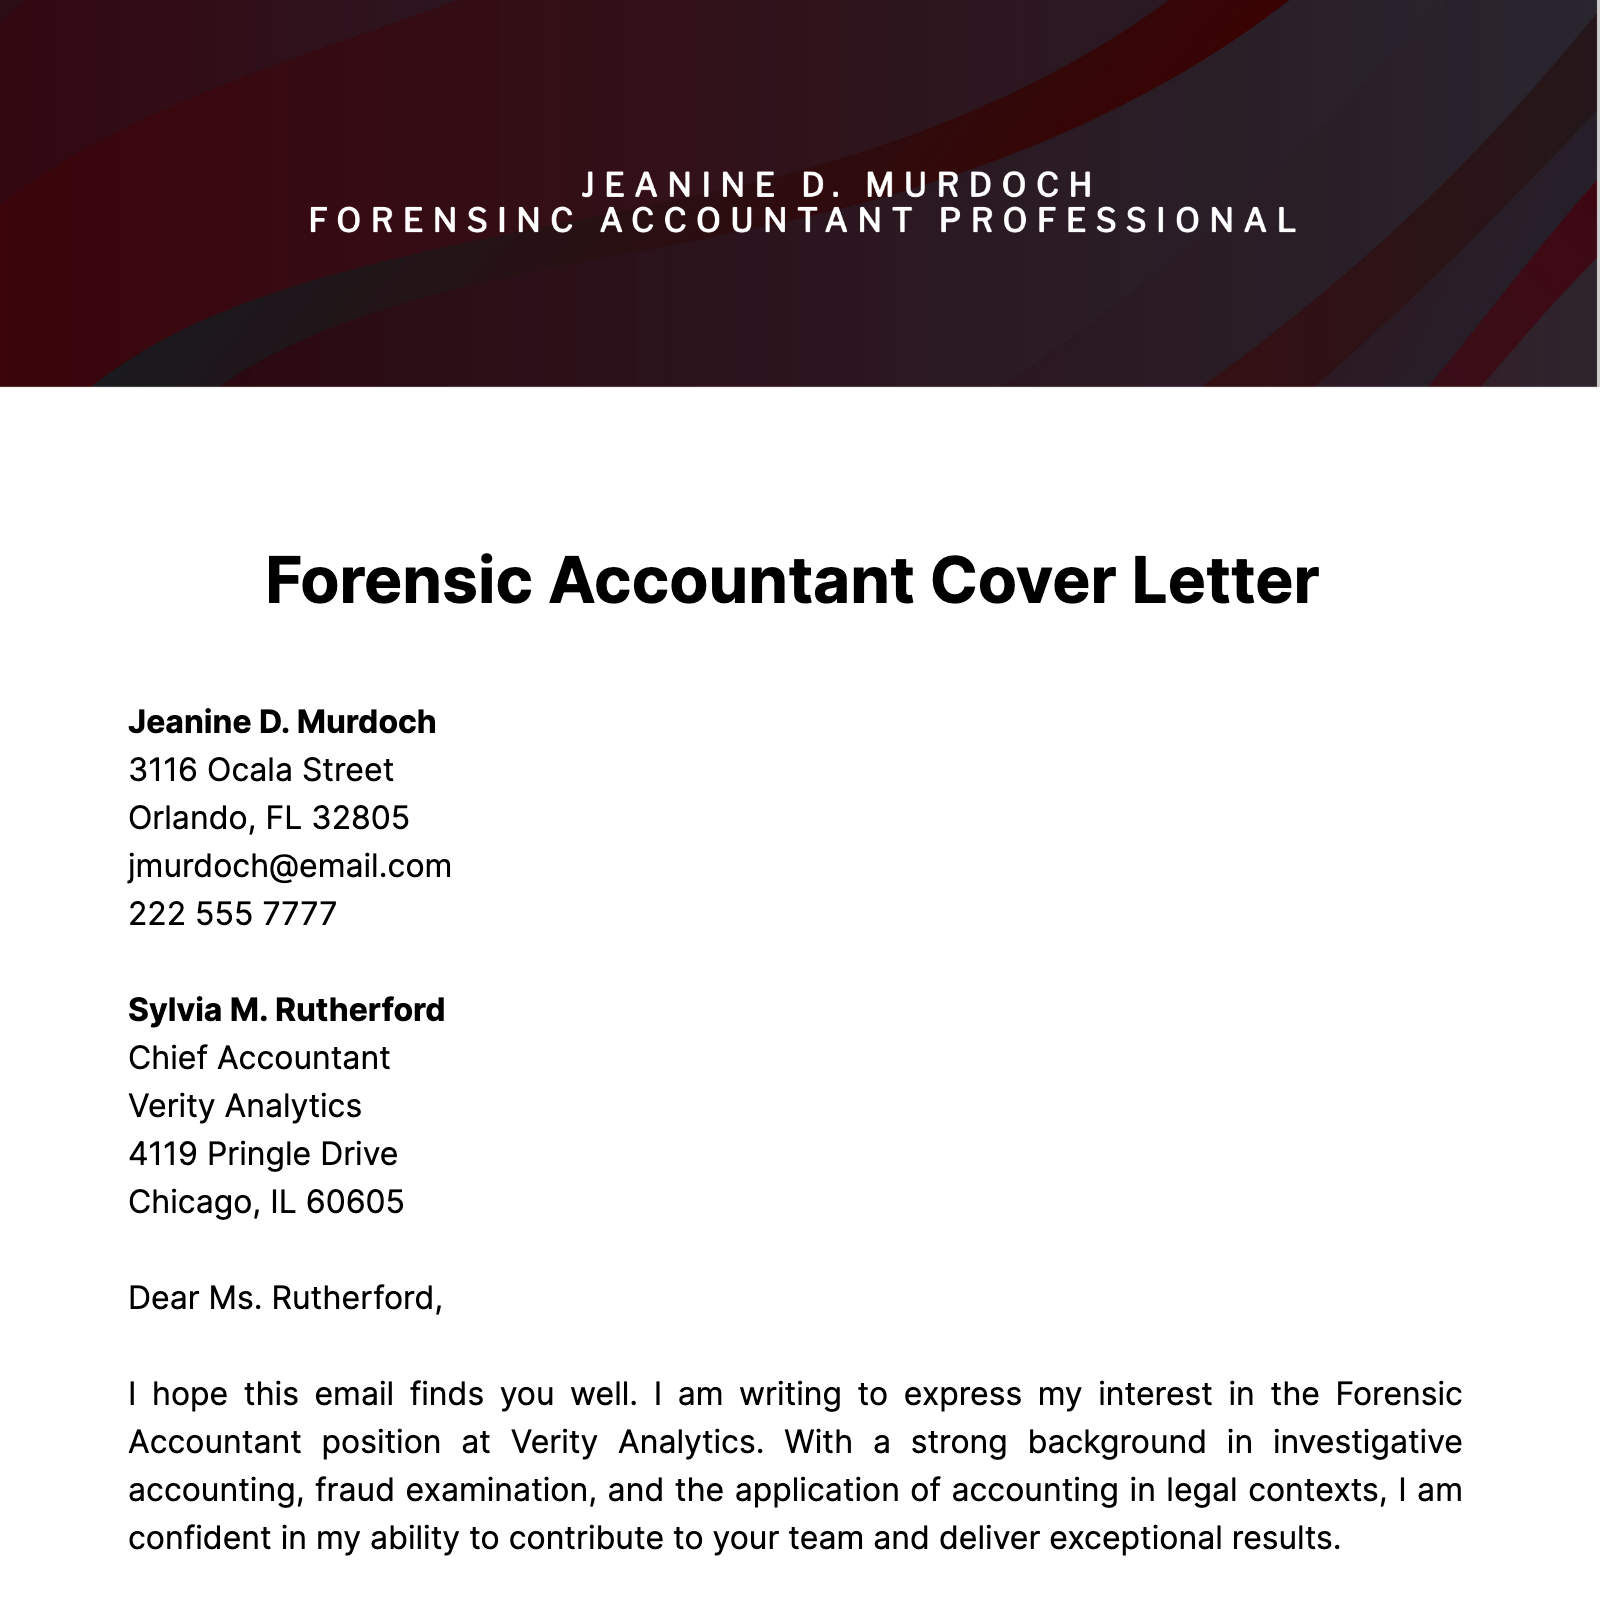 Forensic Accountant Cover Letter  Template